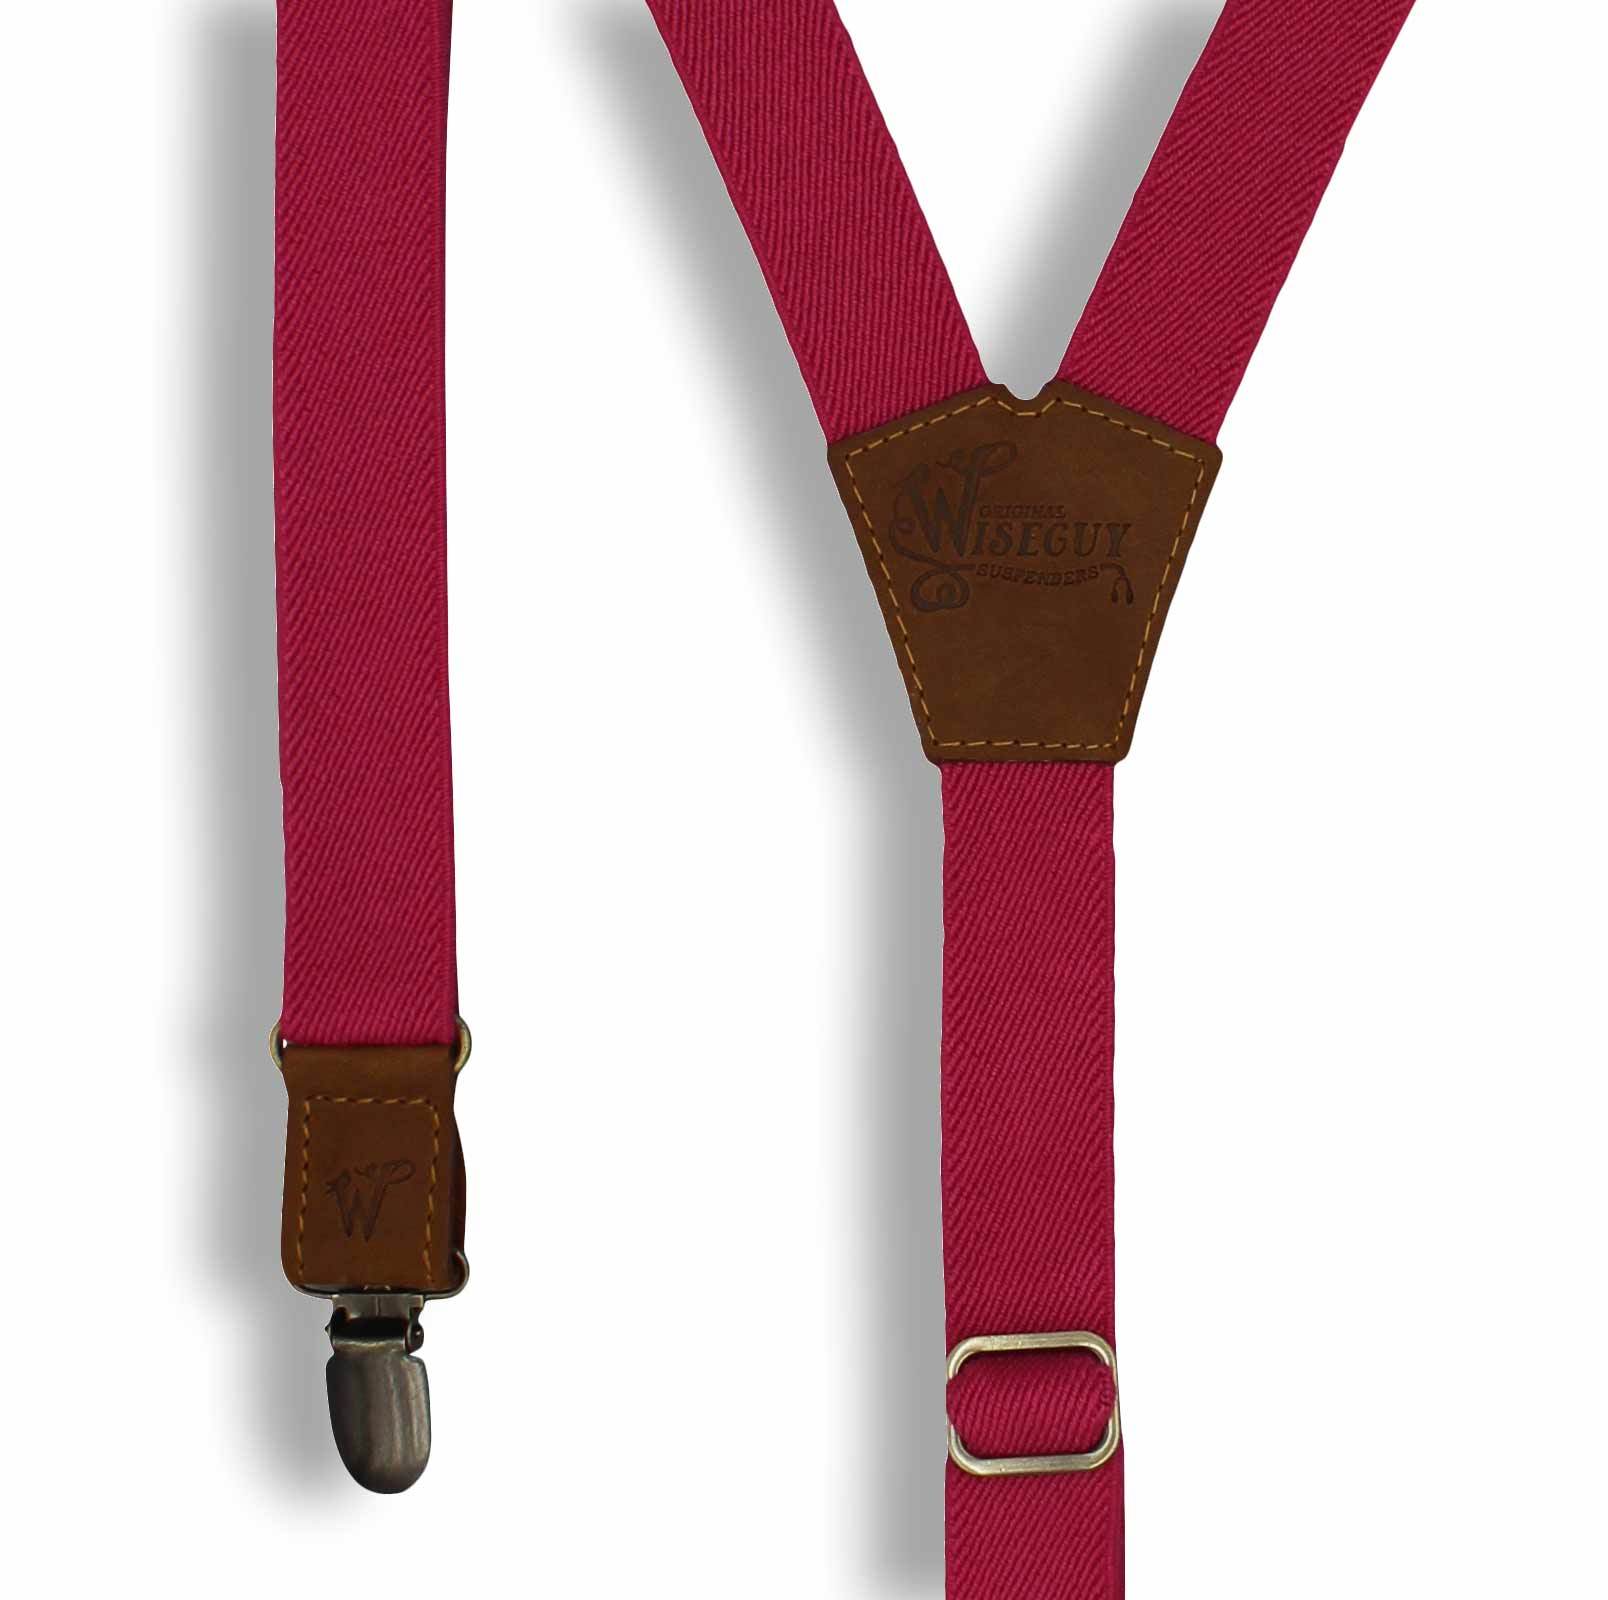 The Cyclamen Red 1 inch thin Y shape casual Suspenders Braces for Men - Wiseguy Suspenders